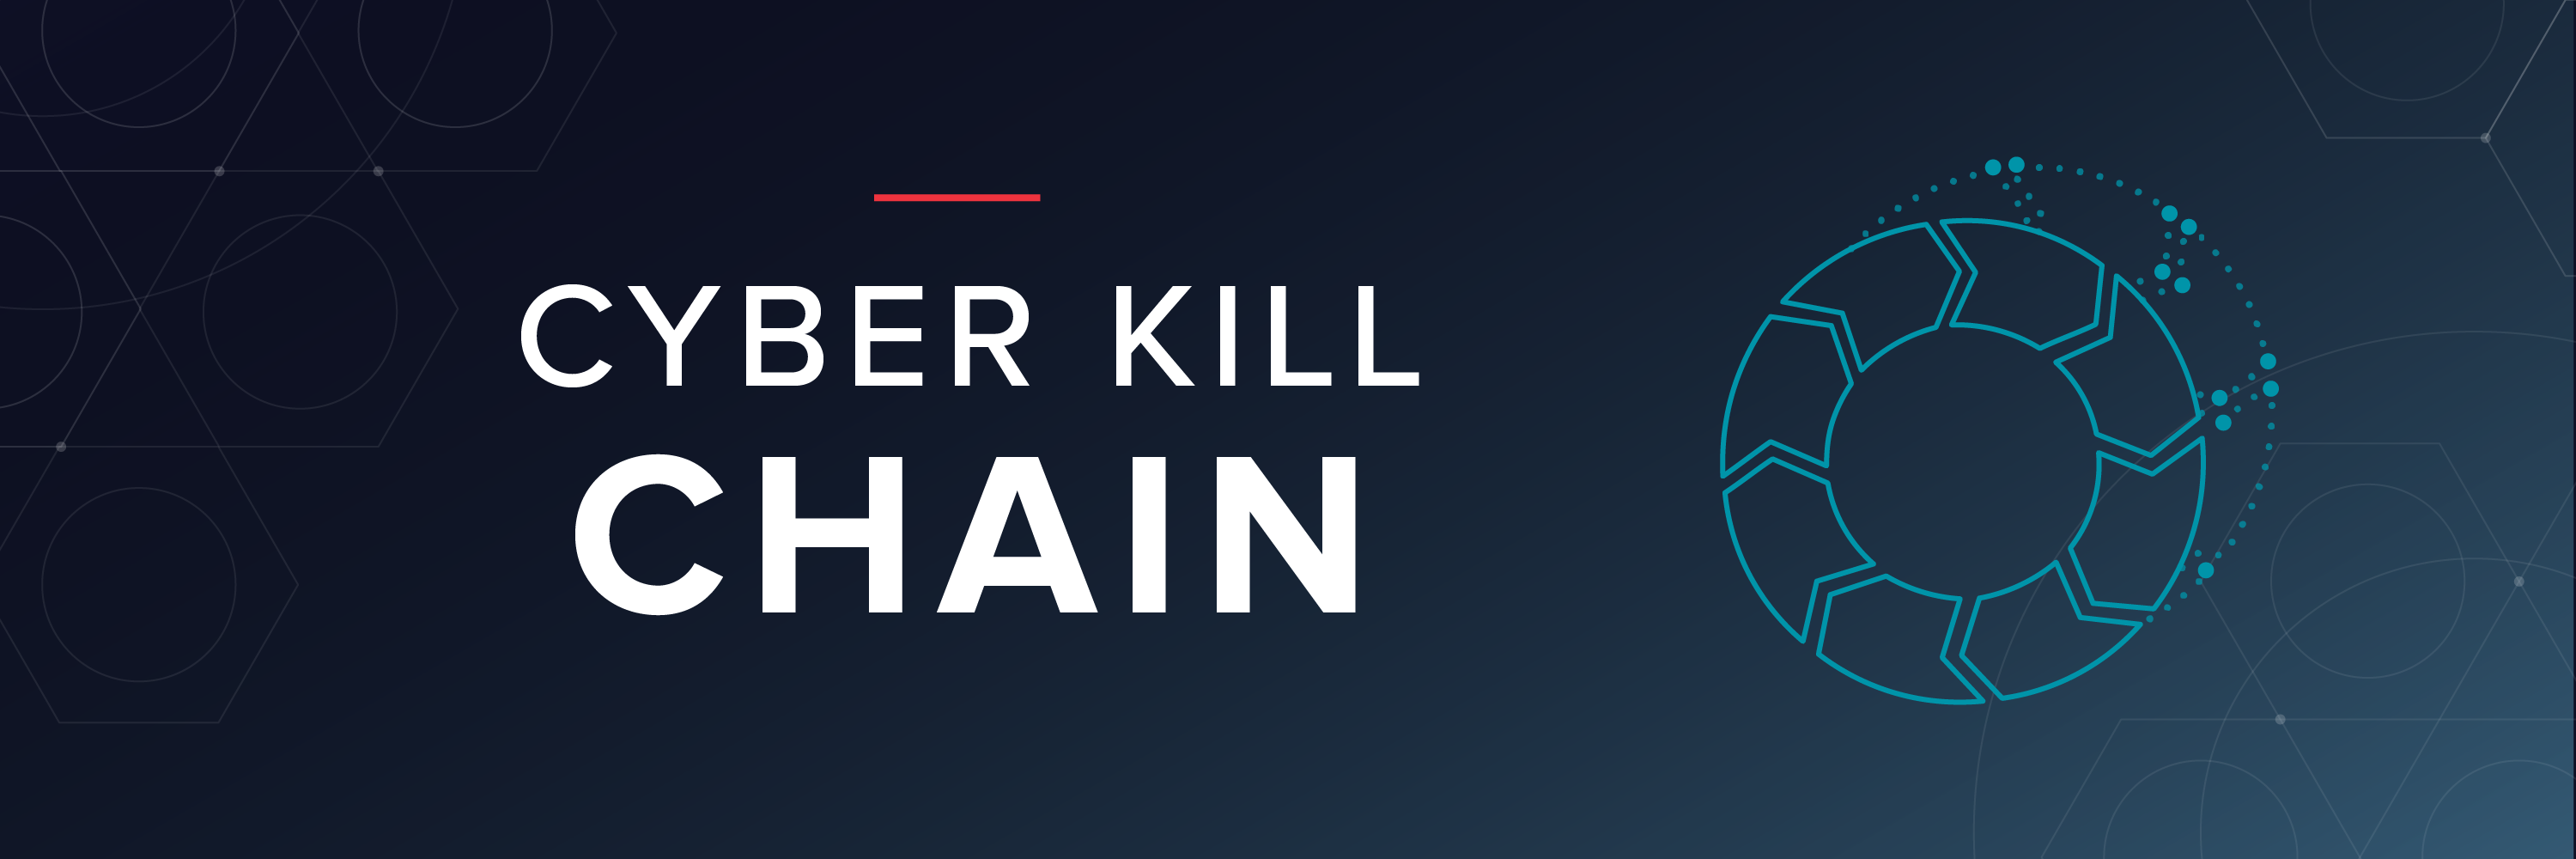 What is The Cyber Kill Chain and How to Use it Effectively | Varonis